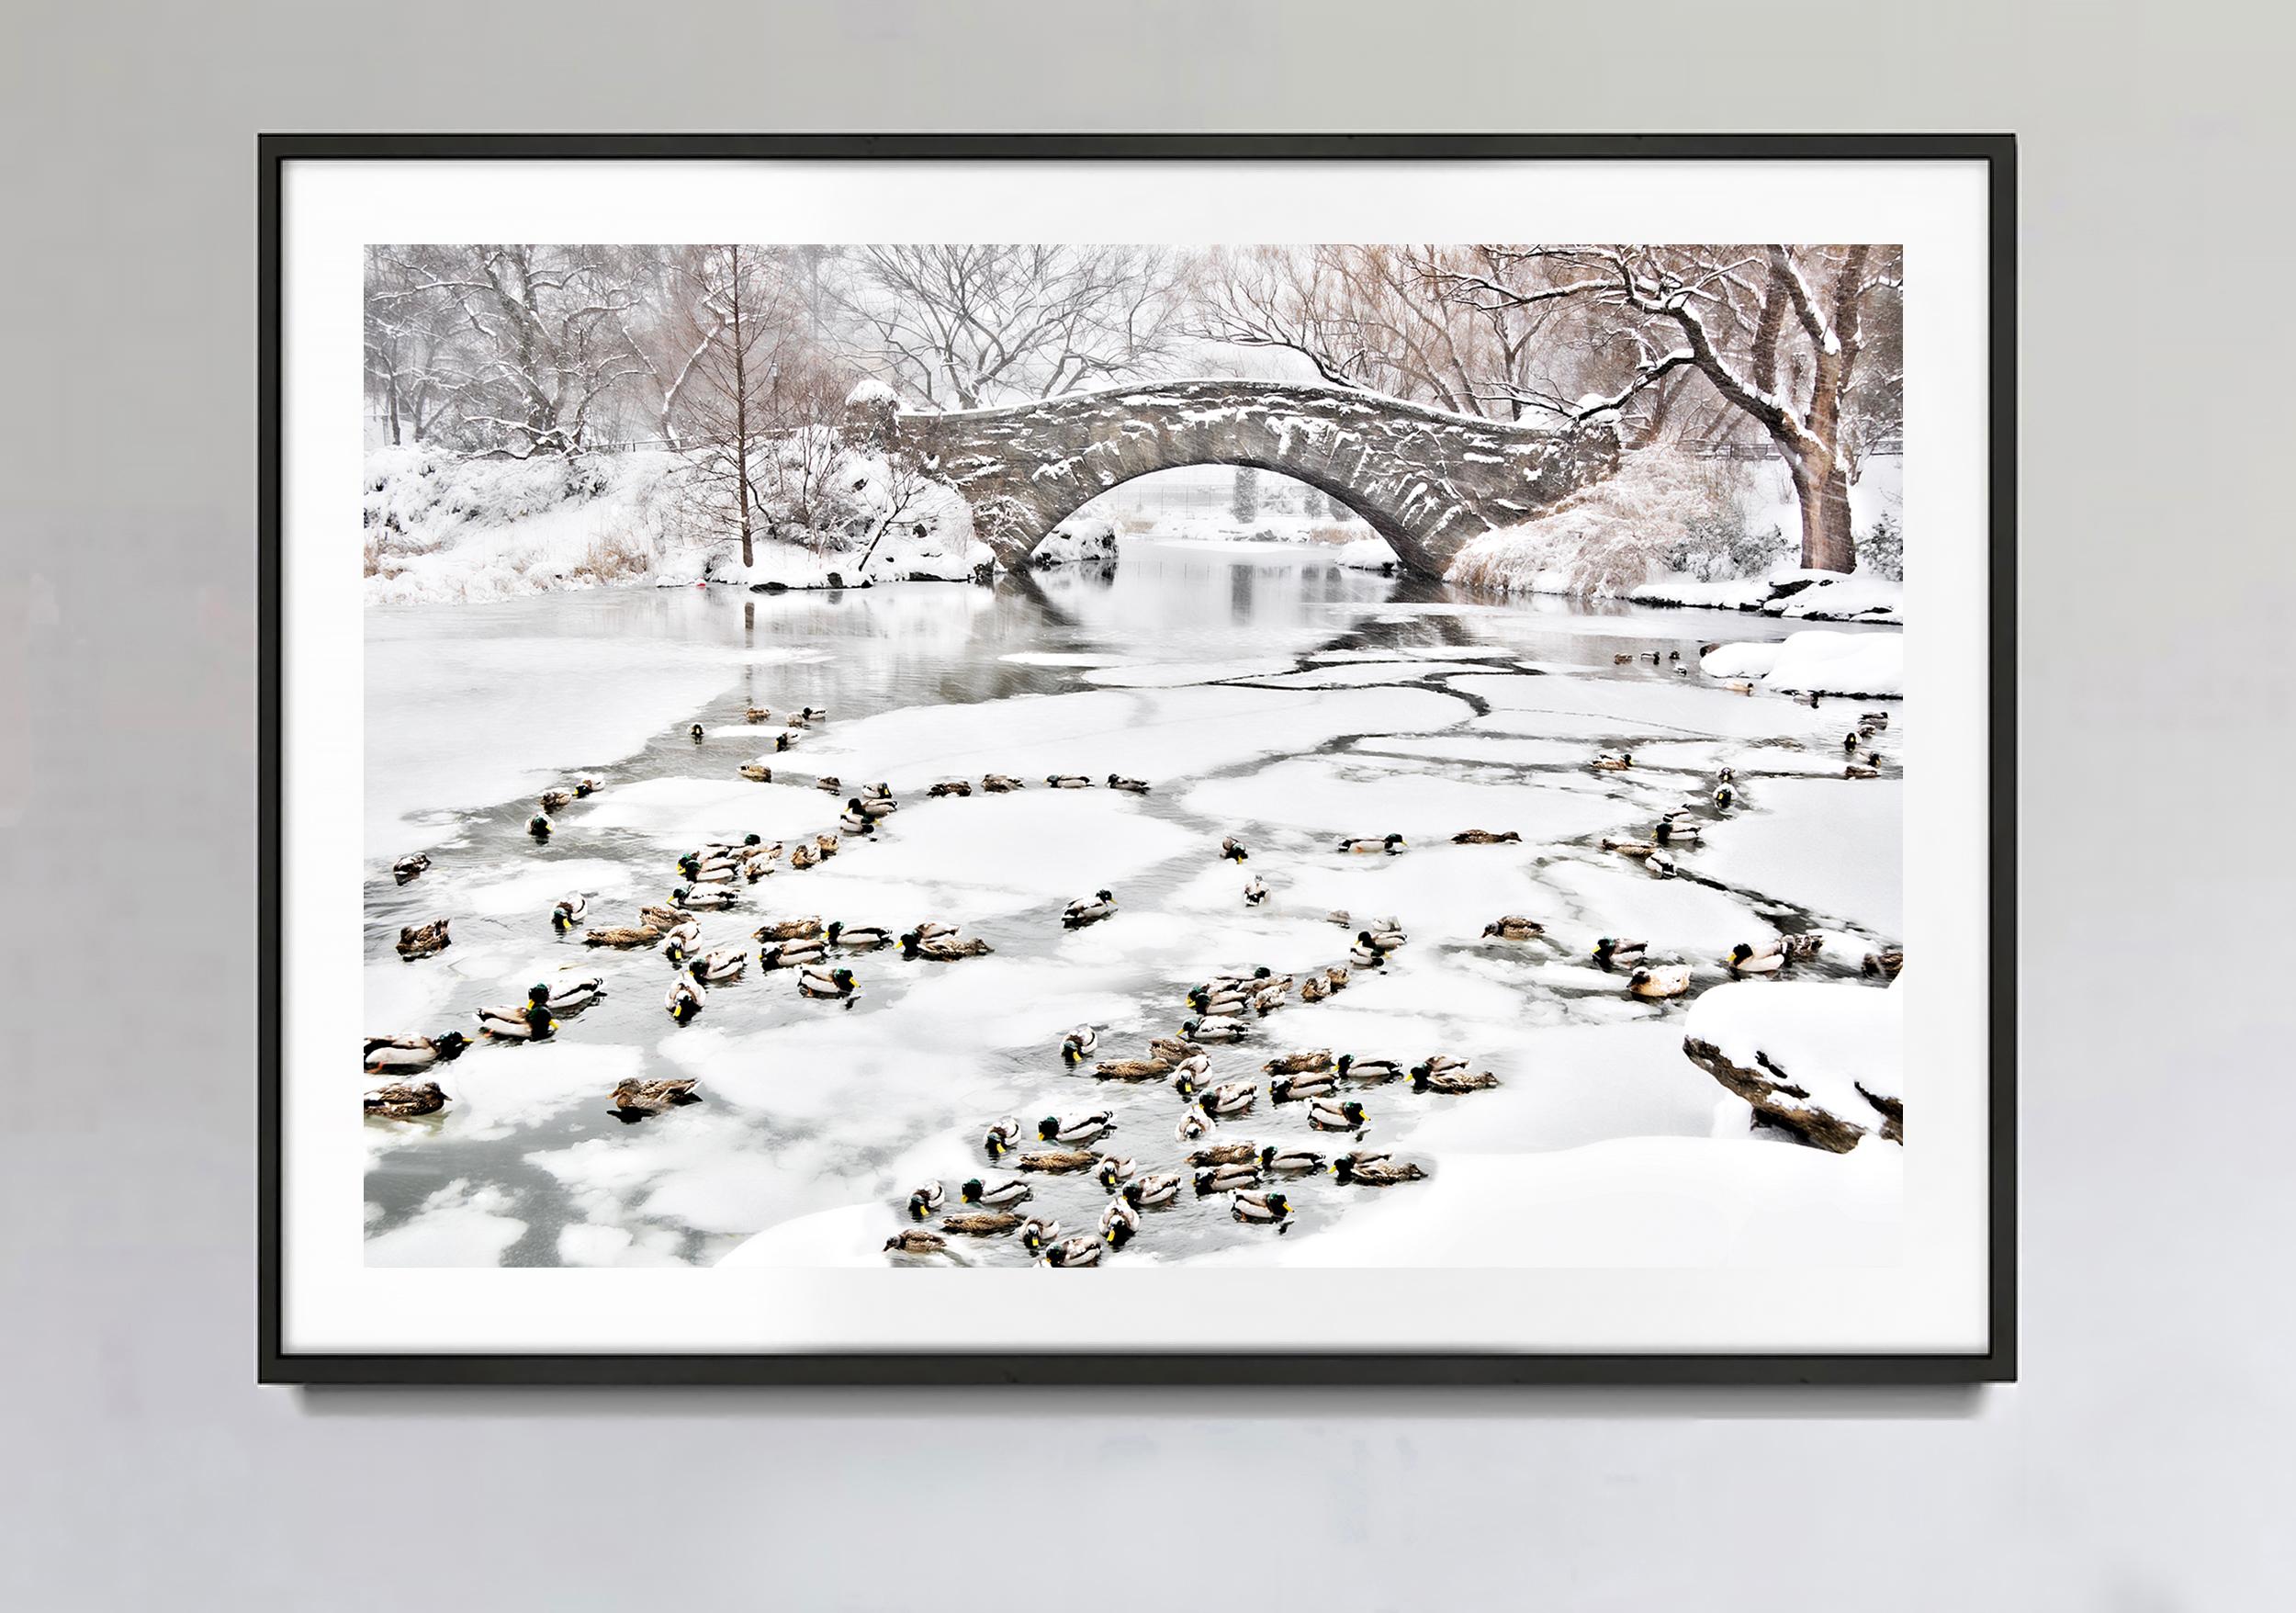 Ducks In Frozen Pond In Snowy Central Park, New York City - Photograph by Mitchell Funk